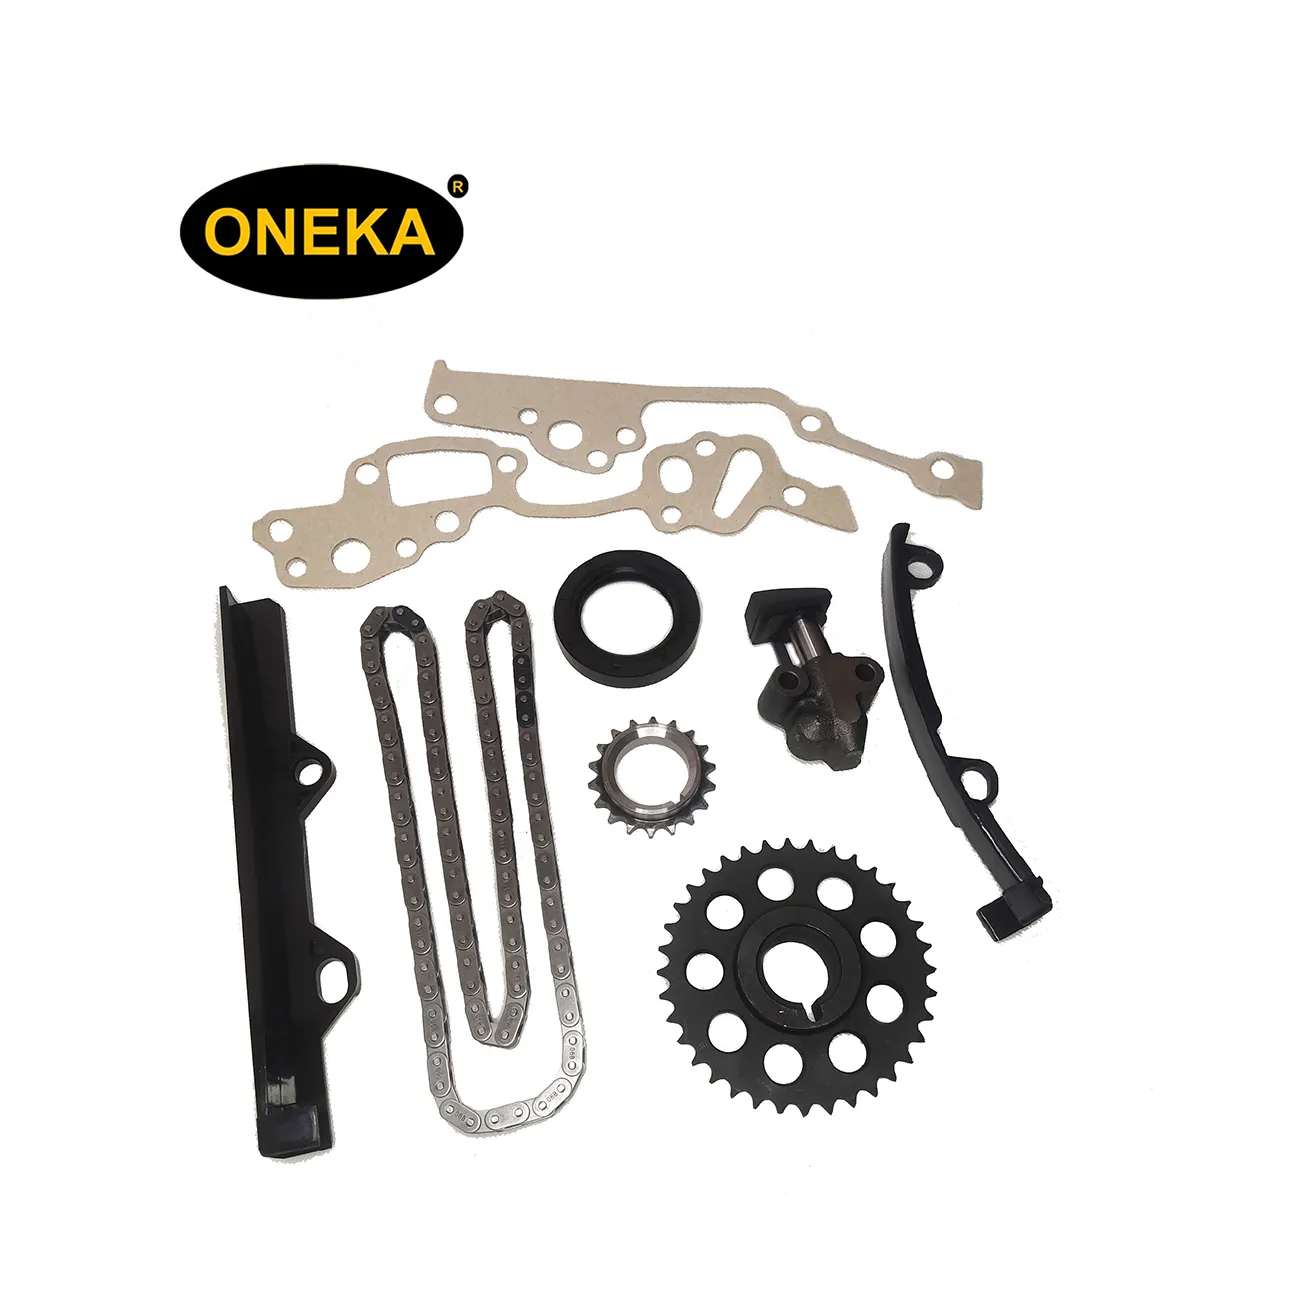 [ONEKA] Timing Chain Kit For Toyota 21R Cressida 2.0RX60 81-86 21R 8V 72KW Engine Spare Parts TK-TY022 9-4141S TK-TY103-A